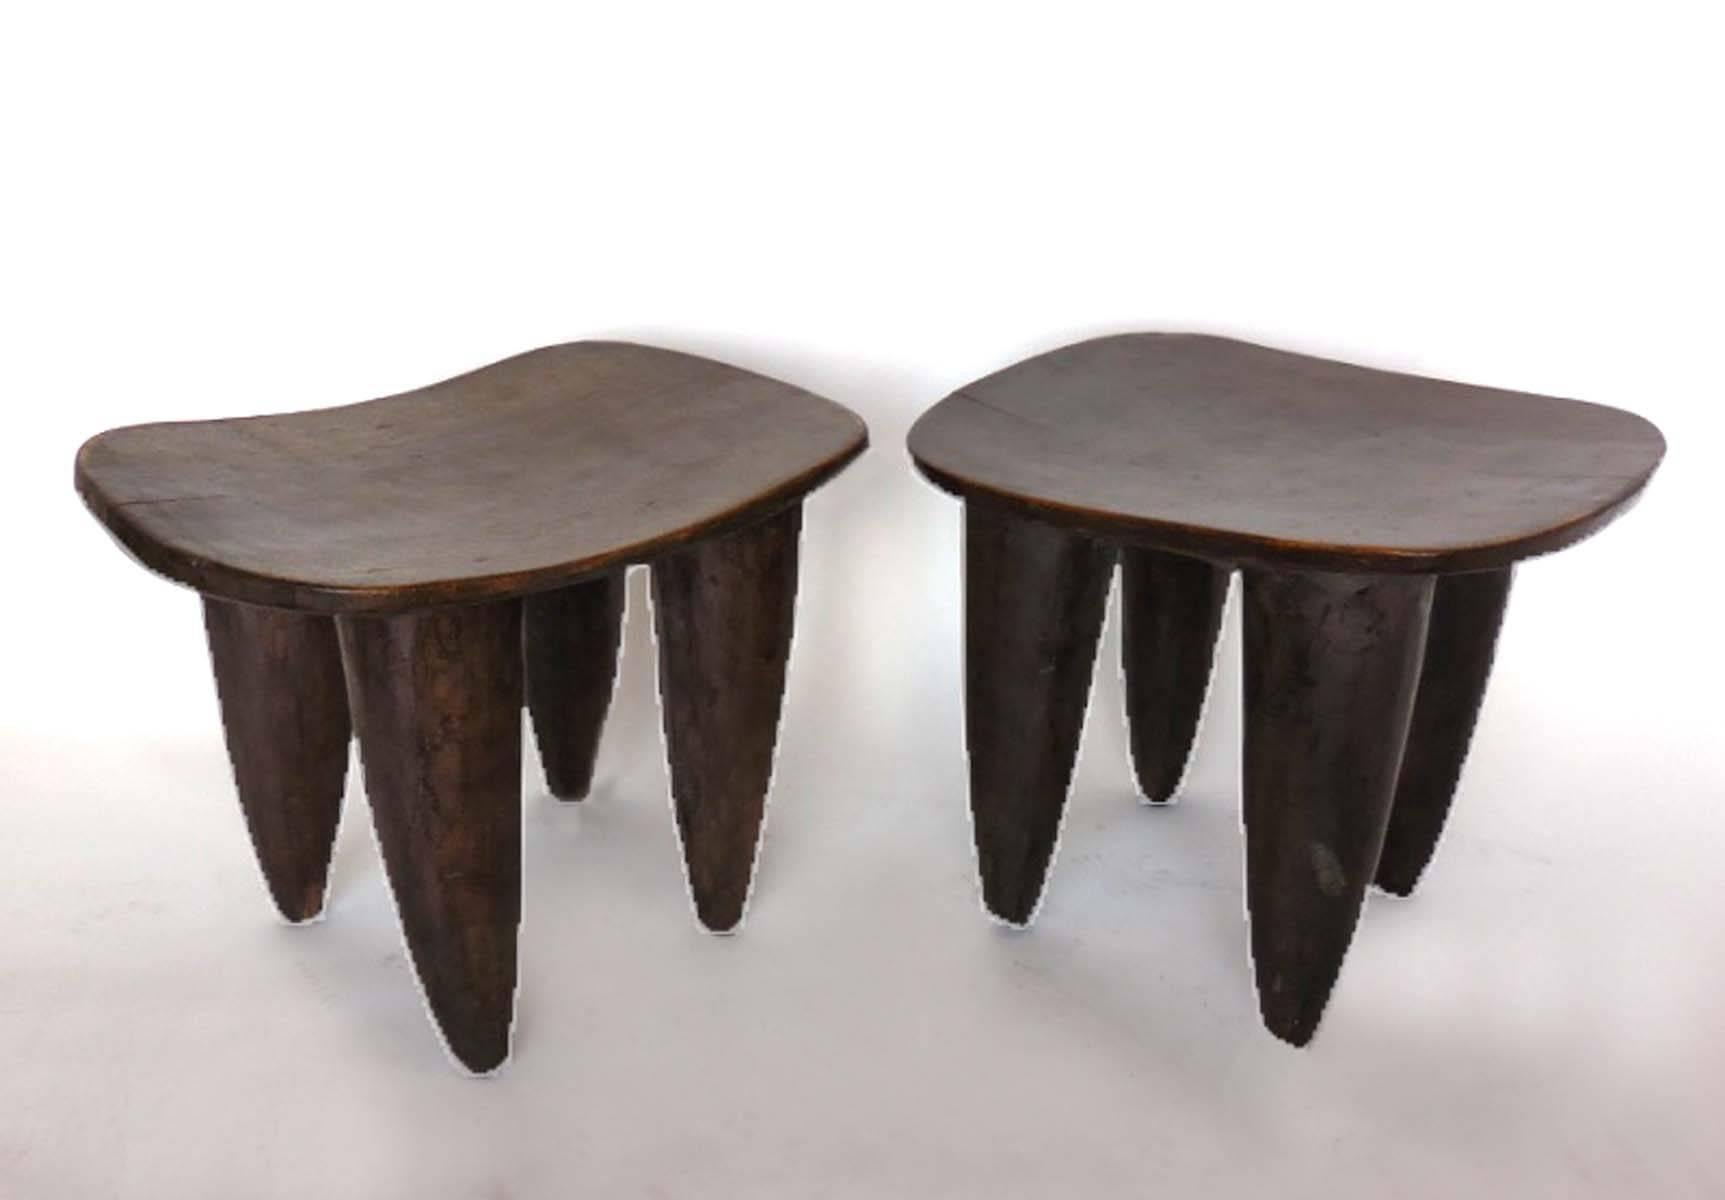 Early 20th century stools or small tables carved out of one piece of wood. From the Senufo tribe in Mali.
Left measures 26 x 19 x 19.5 H and the right measures 24.75 x 20 x 20.5 H. Priced separately.